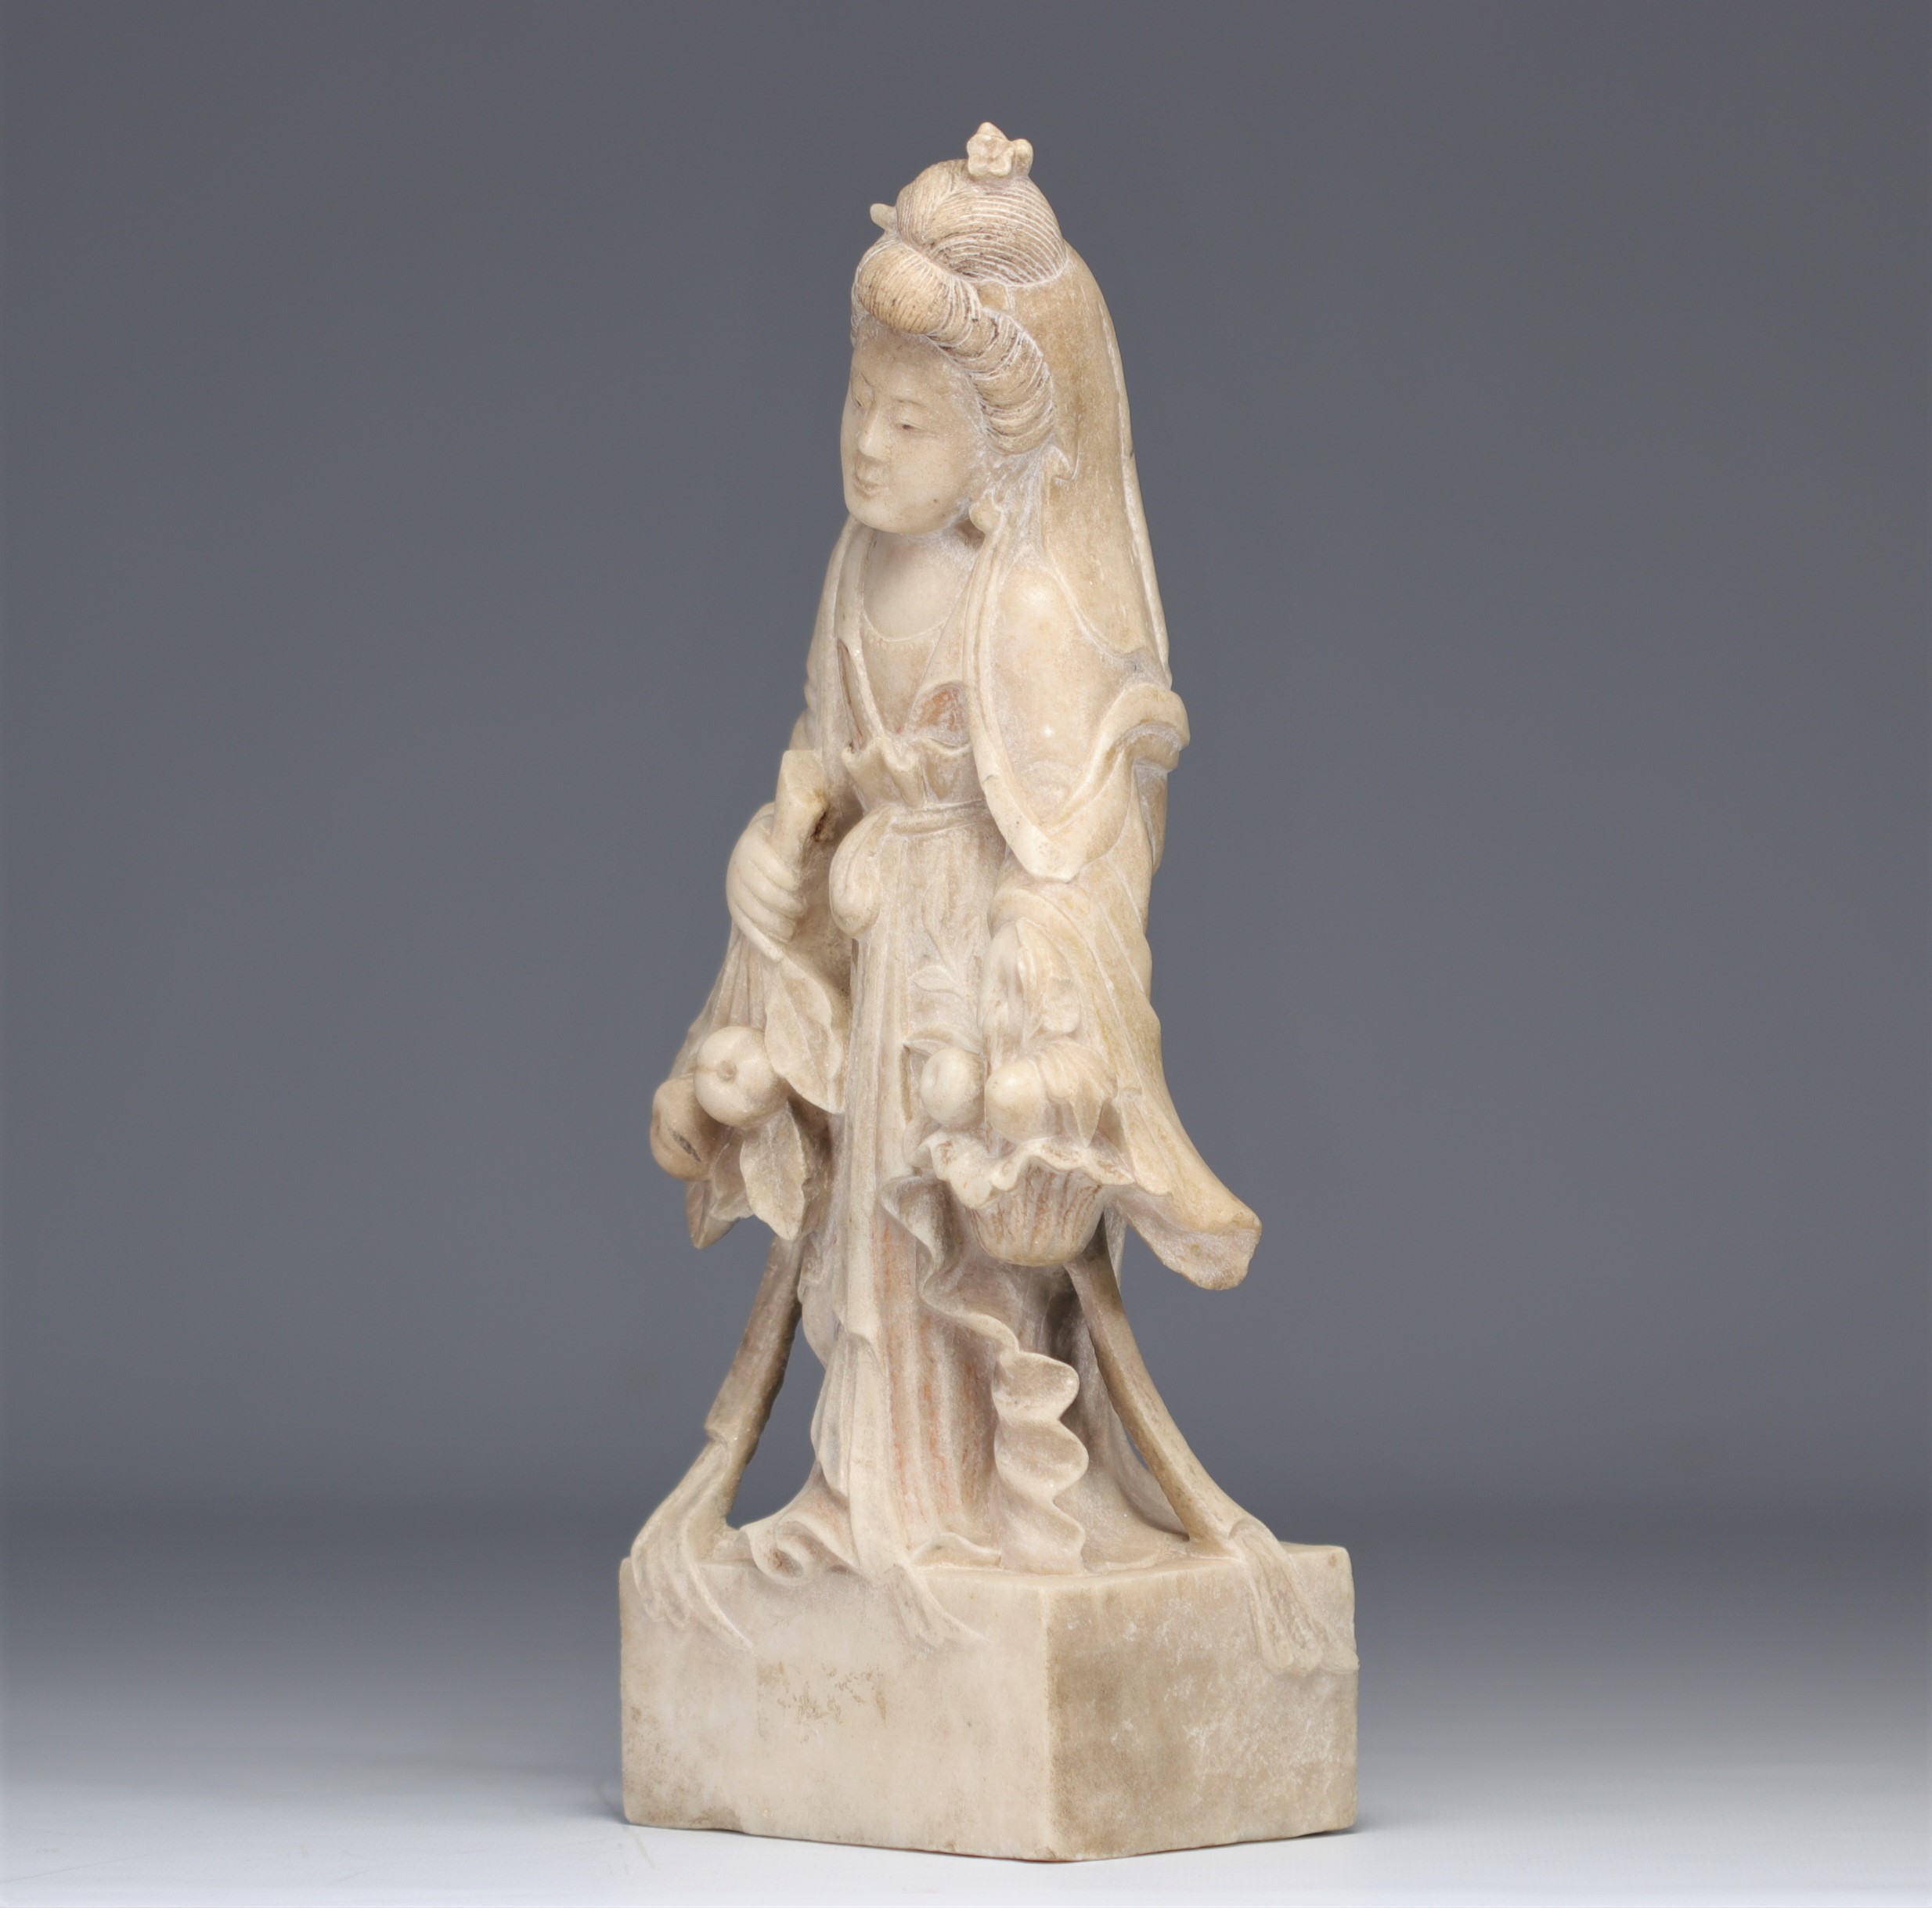 Marble sculpture of a young woman with fruit probably from the Ming period (æ˜Žæœ) - Image 2 of 4